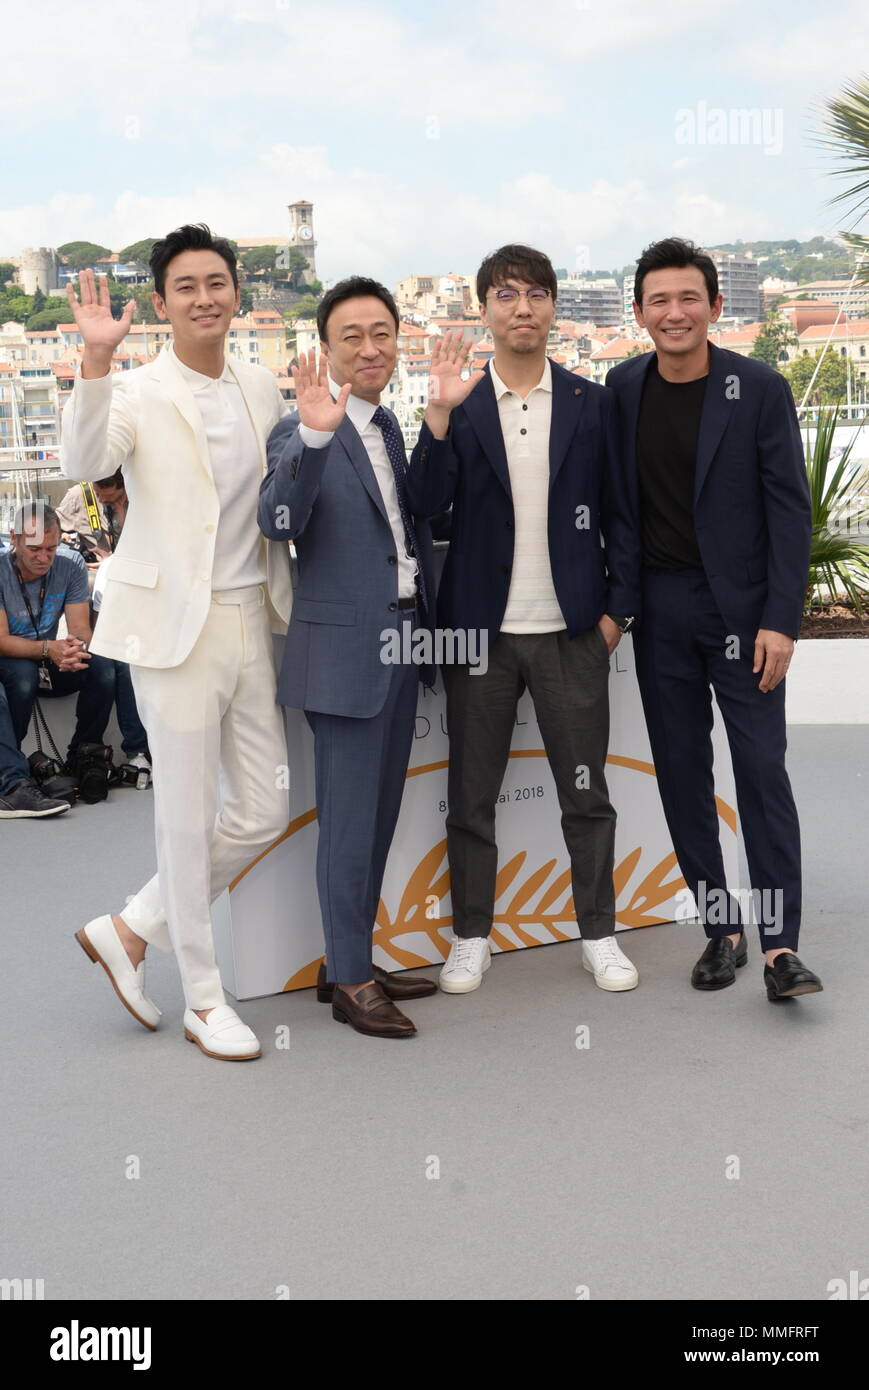 Cannes, France. 11th May, 2018. CANNES, FRANCE - MAY 11: (R-L) Actors Jung-min Hwang, Sung-min Lee and Ji-Hoon Ju attend the photocall for 'The Spy Gone North (Gongjak)' during the 71st annual Cannes Film Festival at Palais des Festivals on May 11, 2018 in Cannes, France. Credit: Frederick Injimbert/ZUMA Wire/Alamy Live News Stock Photo